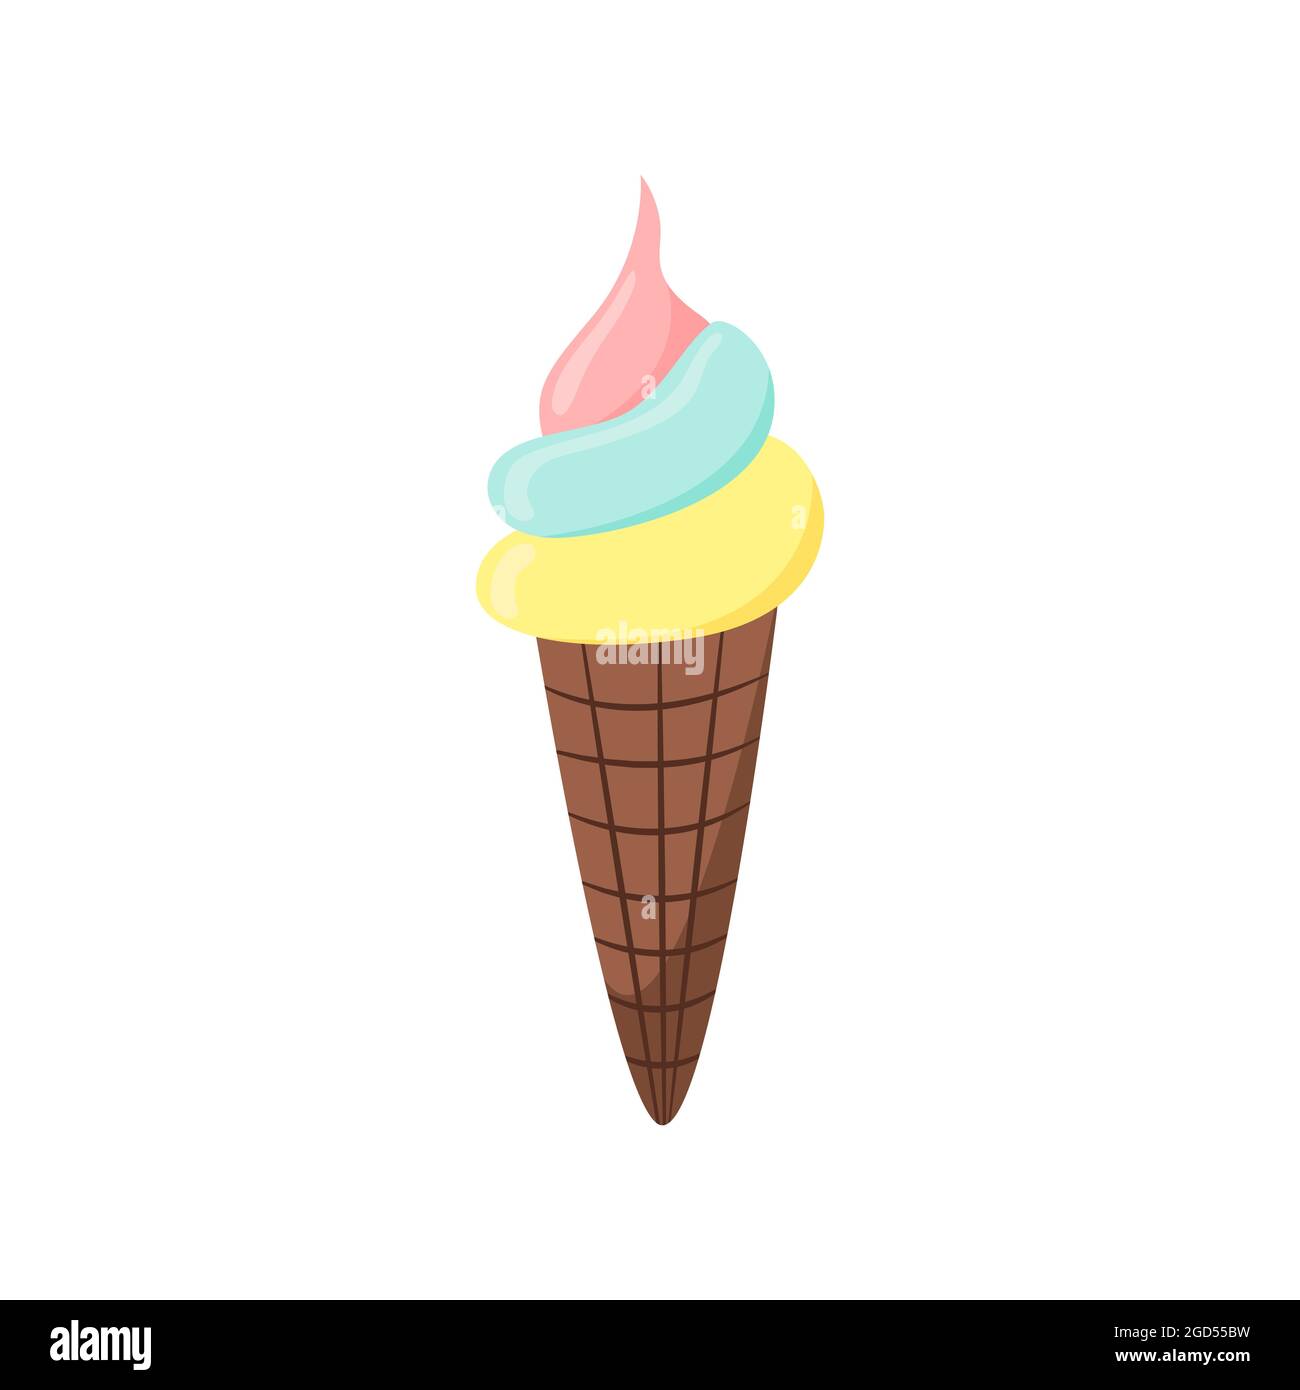 https://c8.alamy.com/comp/2GD55BW/colored-flat-icon-with-an-ice-cream-cone-summer-mood-element-clipart-object-item-for-sticker-logo-label-emblem-for-an-ice-cream-maker-2GD55BW.jpg